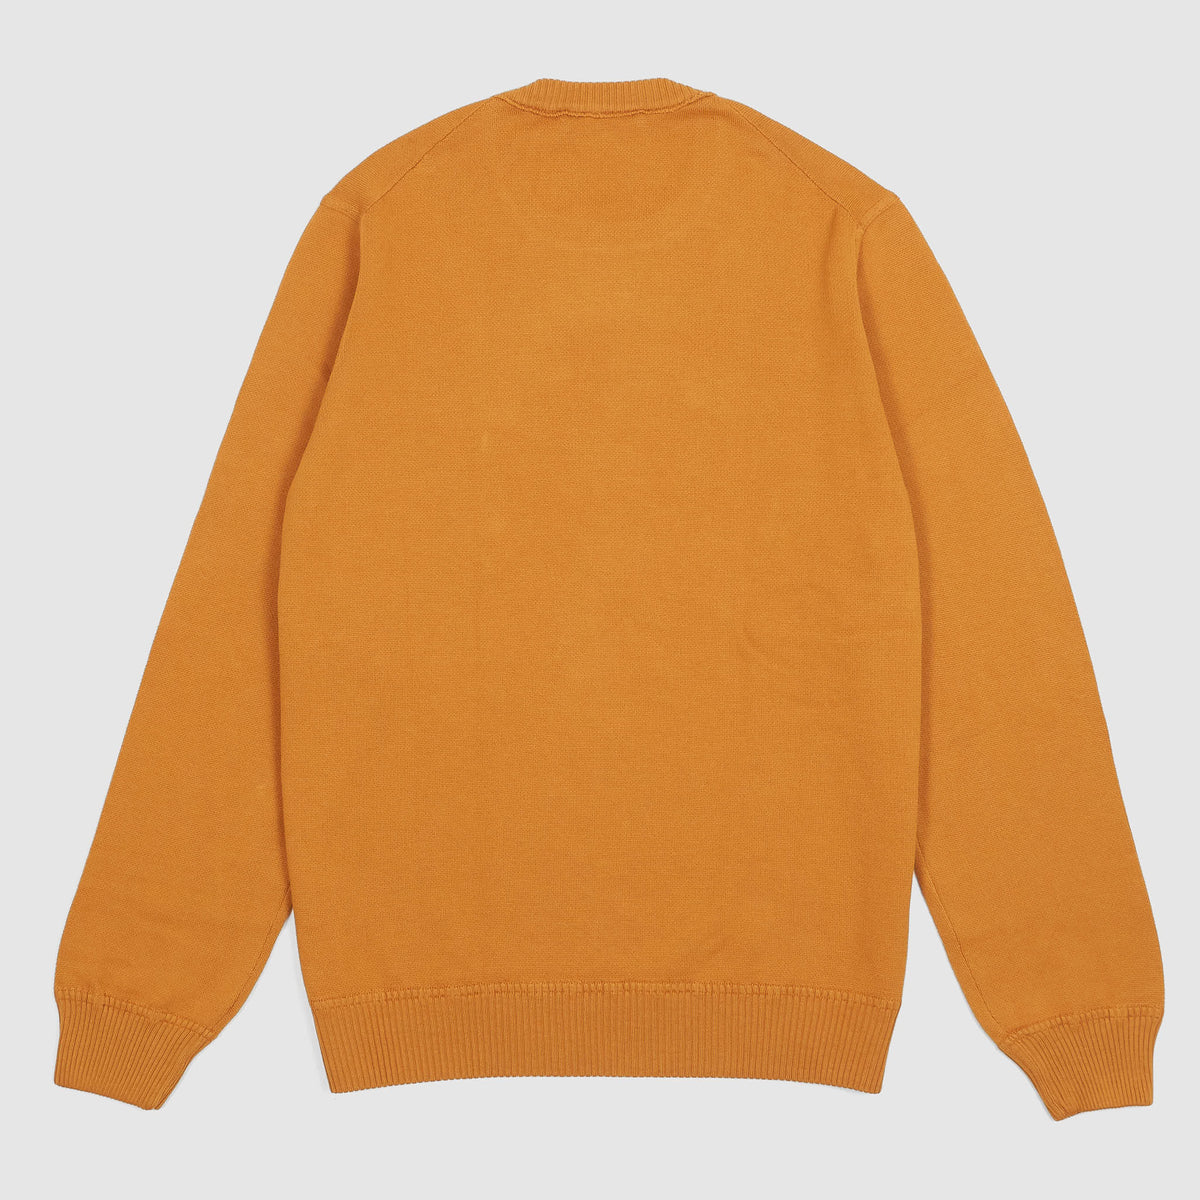 Gran Sasso Cotton Crew Neck Knitted Sweater